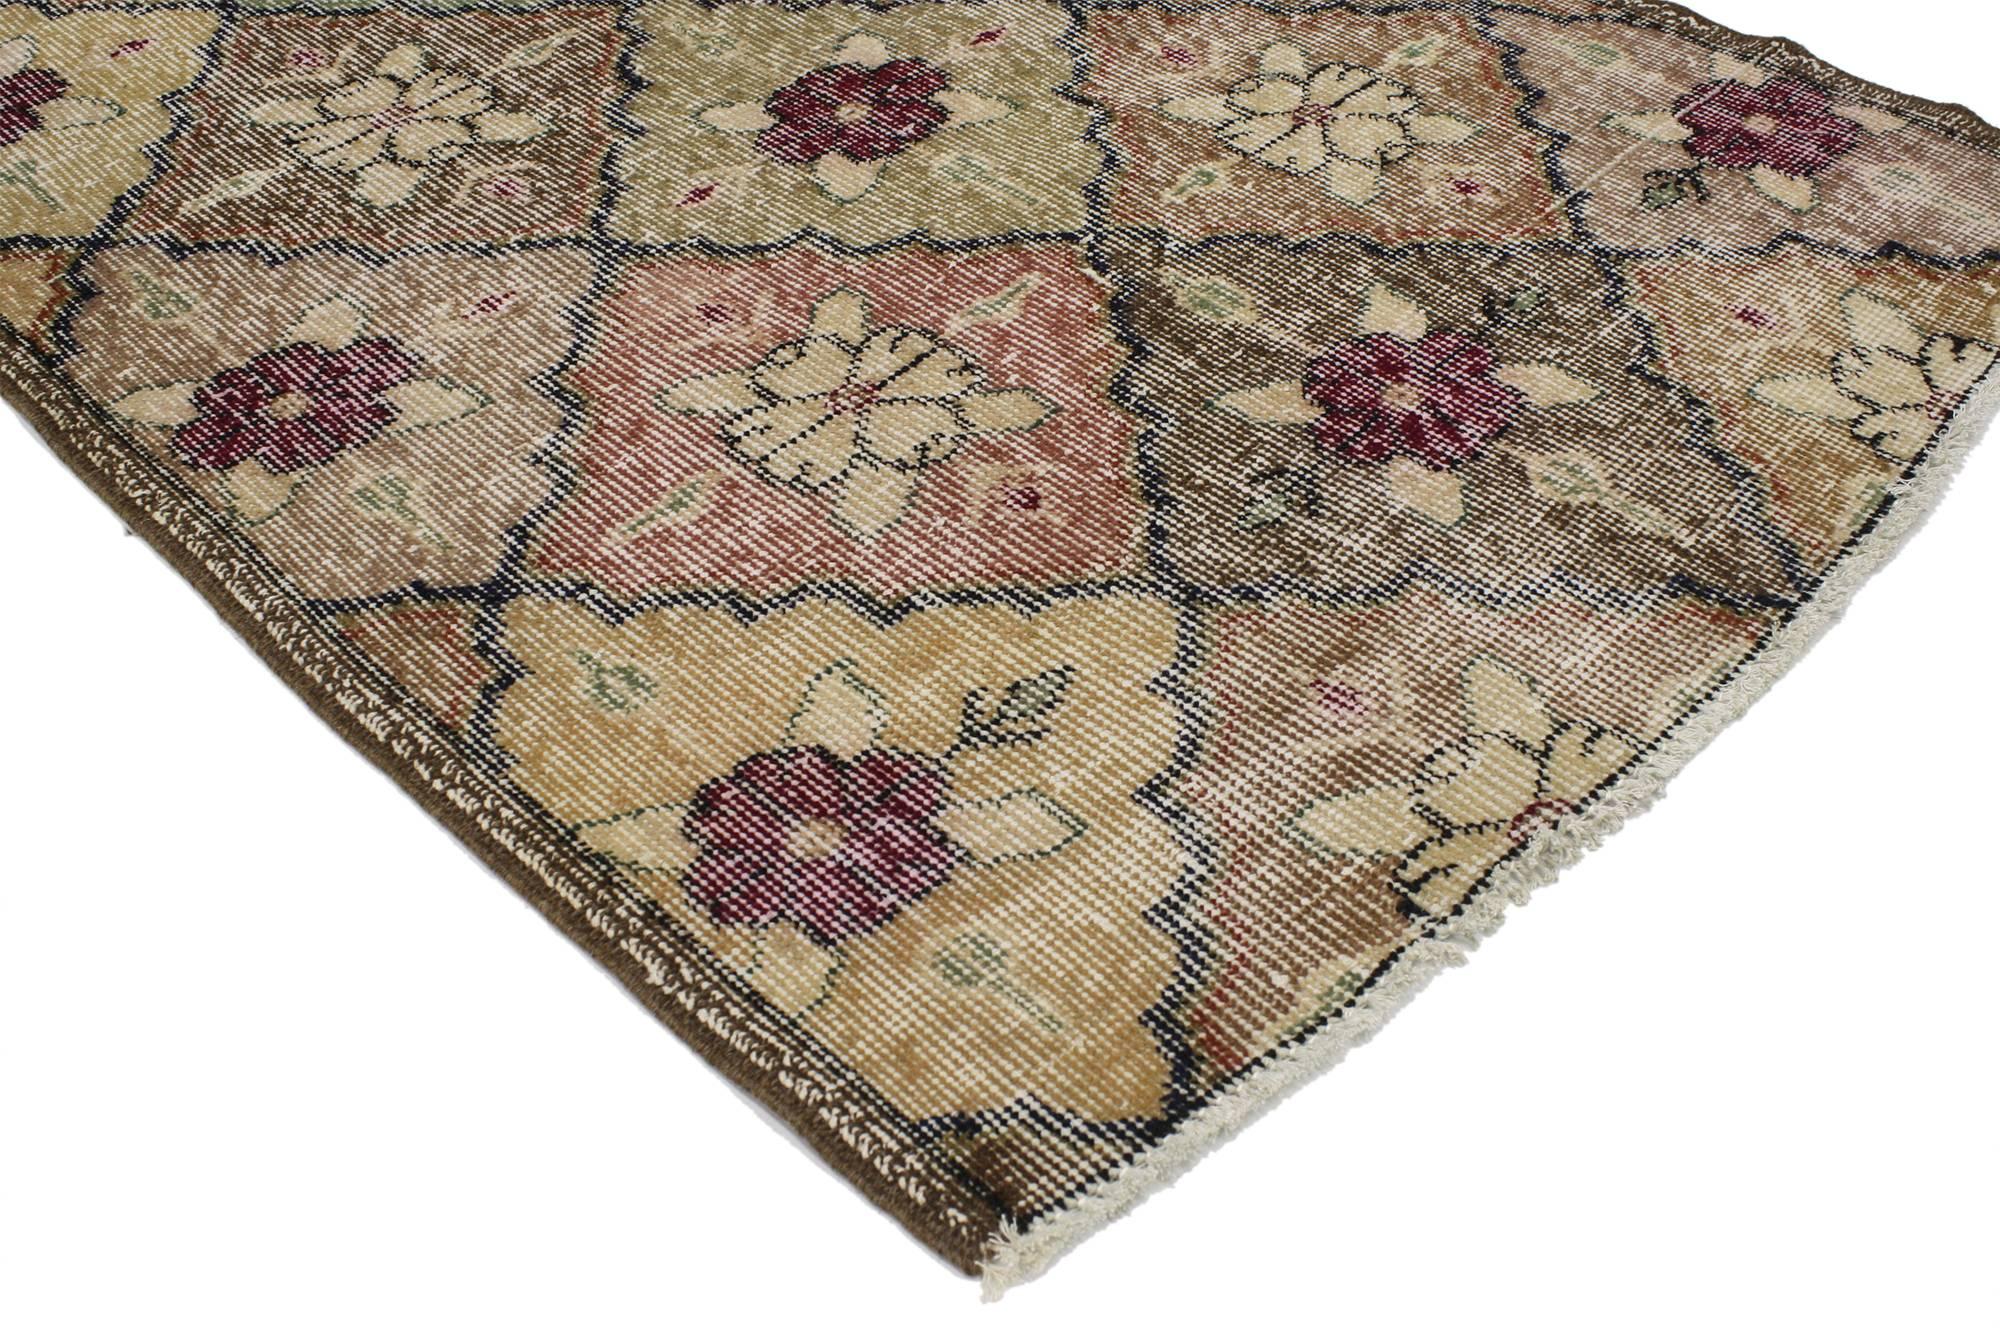 51968 Distressed Vintage Turkish Sivas Runner with Arts & Crafts Cottage Style 02'10 x 06'09. Reflecting elements of nature and Biophilic design, this hand knotted wool distressed vintage Turkish Sivas rug awakens the soul with elevated Arts and